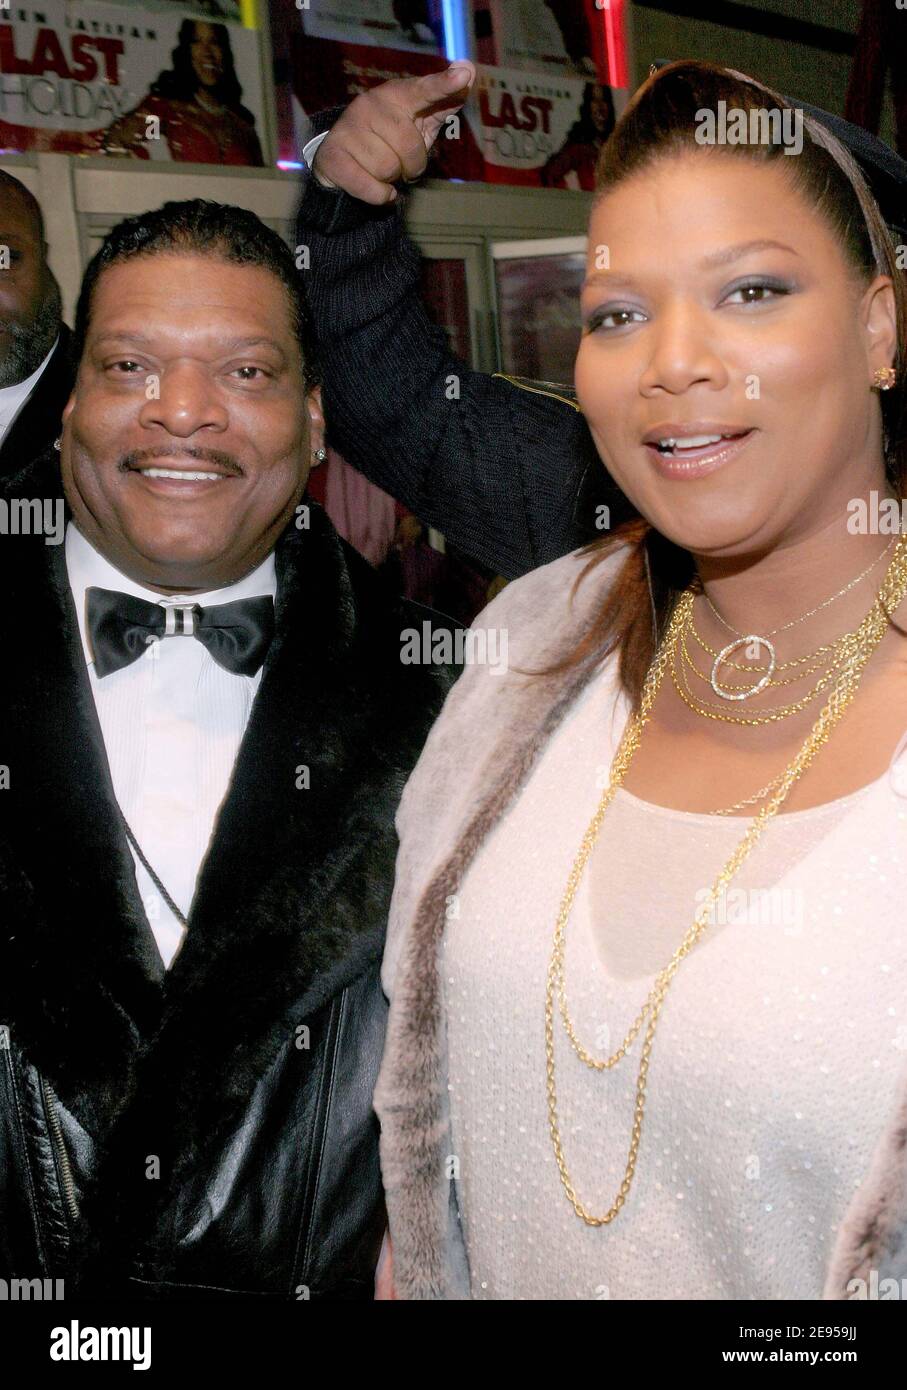 Queen Latifah and her father Lancelot Owens attend the premiere of Last Holiday featuring Queen Latifah in Newark, New Jersey, USA, on January 11, 2006. Photo by Tim Grant/ABACAPRESS.COM Stock Photo